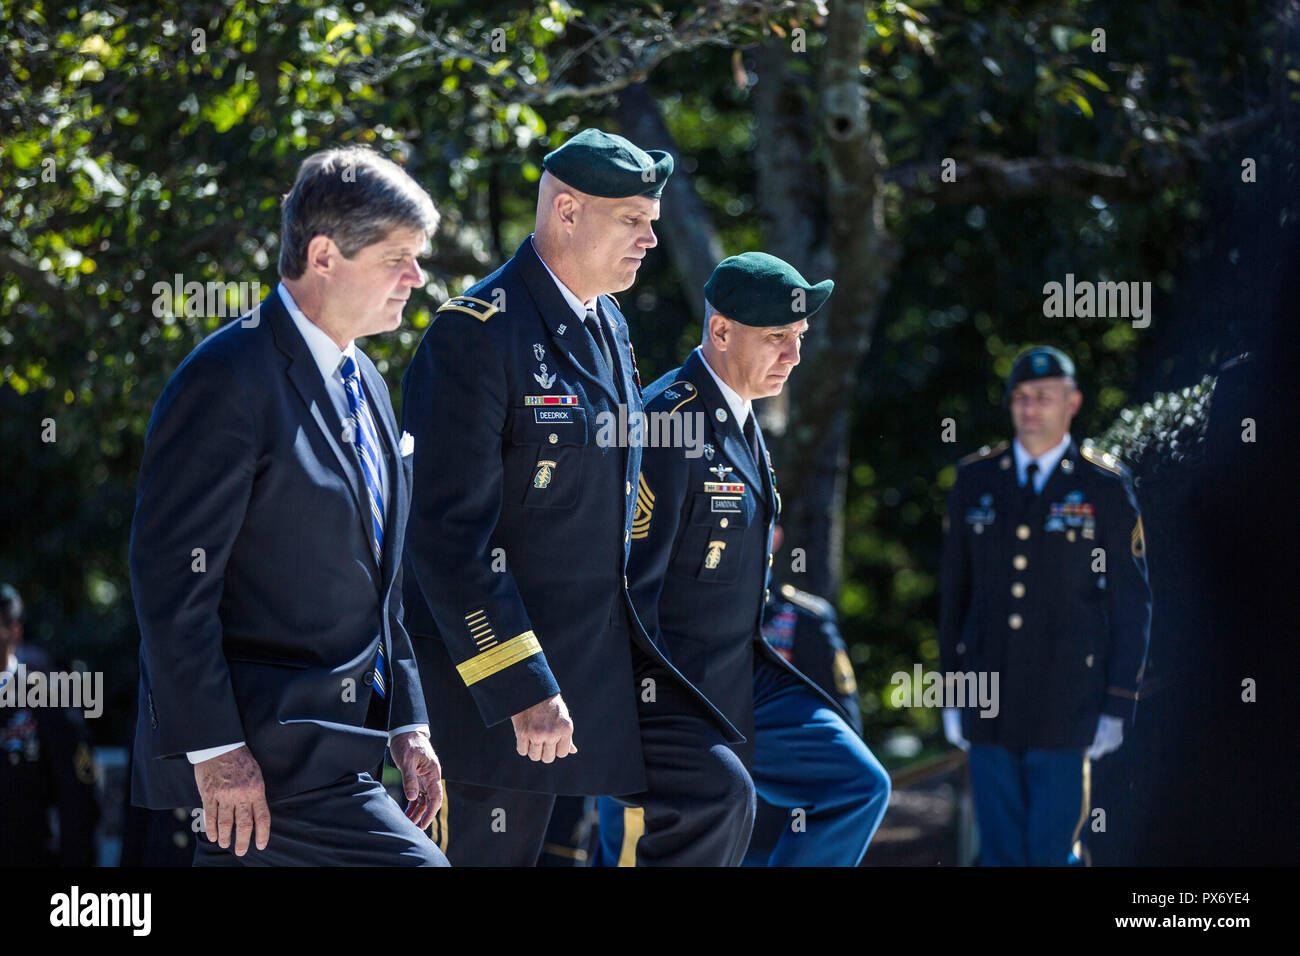 Dr. William Kennedy Smith, left, nephew of President John F. Kennedy joins U.S. Army Maj. Gen. John Deedrick, and Command Sgt. Maj. Tomas Sandoval, during a wreath ceremony at the gravesite of President Kennedy at Arlington National Cemetery October 17, 2018 in Arlington, Virginia. The annual ceremony pays tribute to vision of President Kennedy for creating a dedicated counter-insurgence force and his uncompromising support to the U.S. Green Berets. Stock Photo